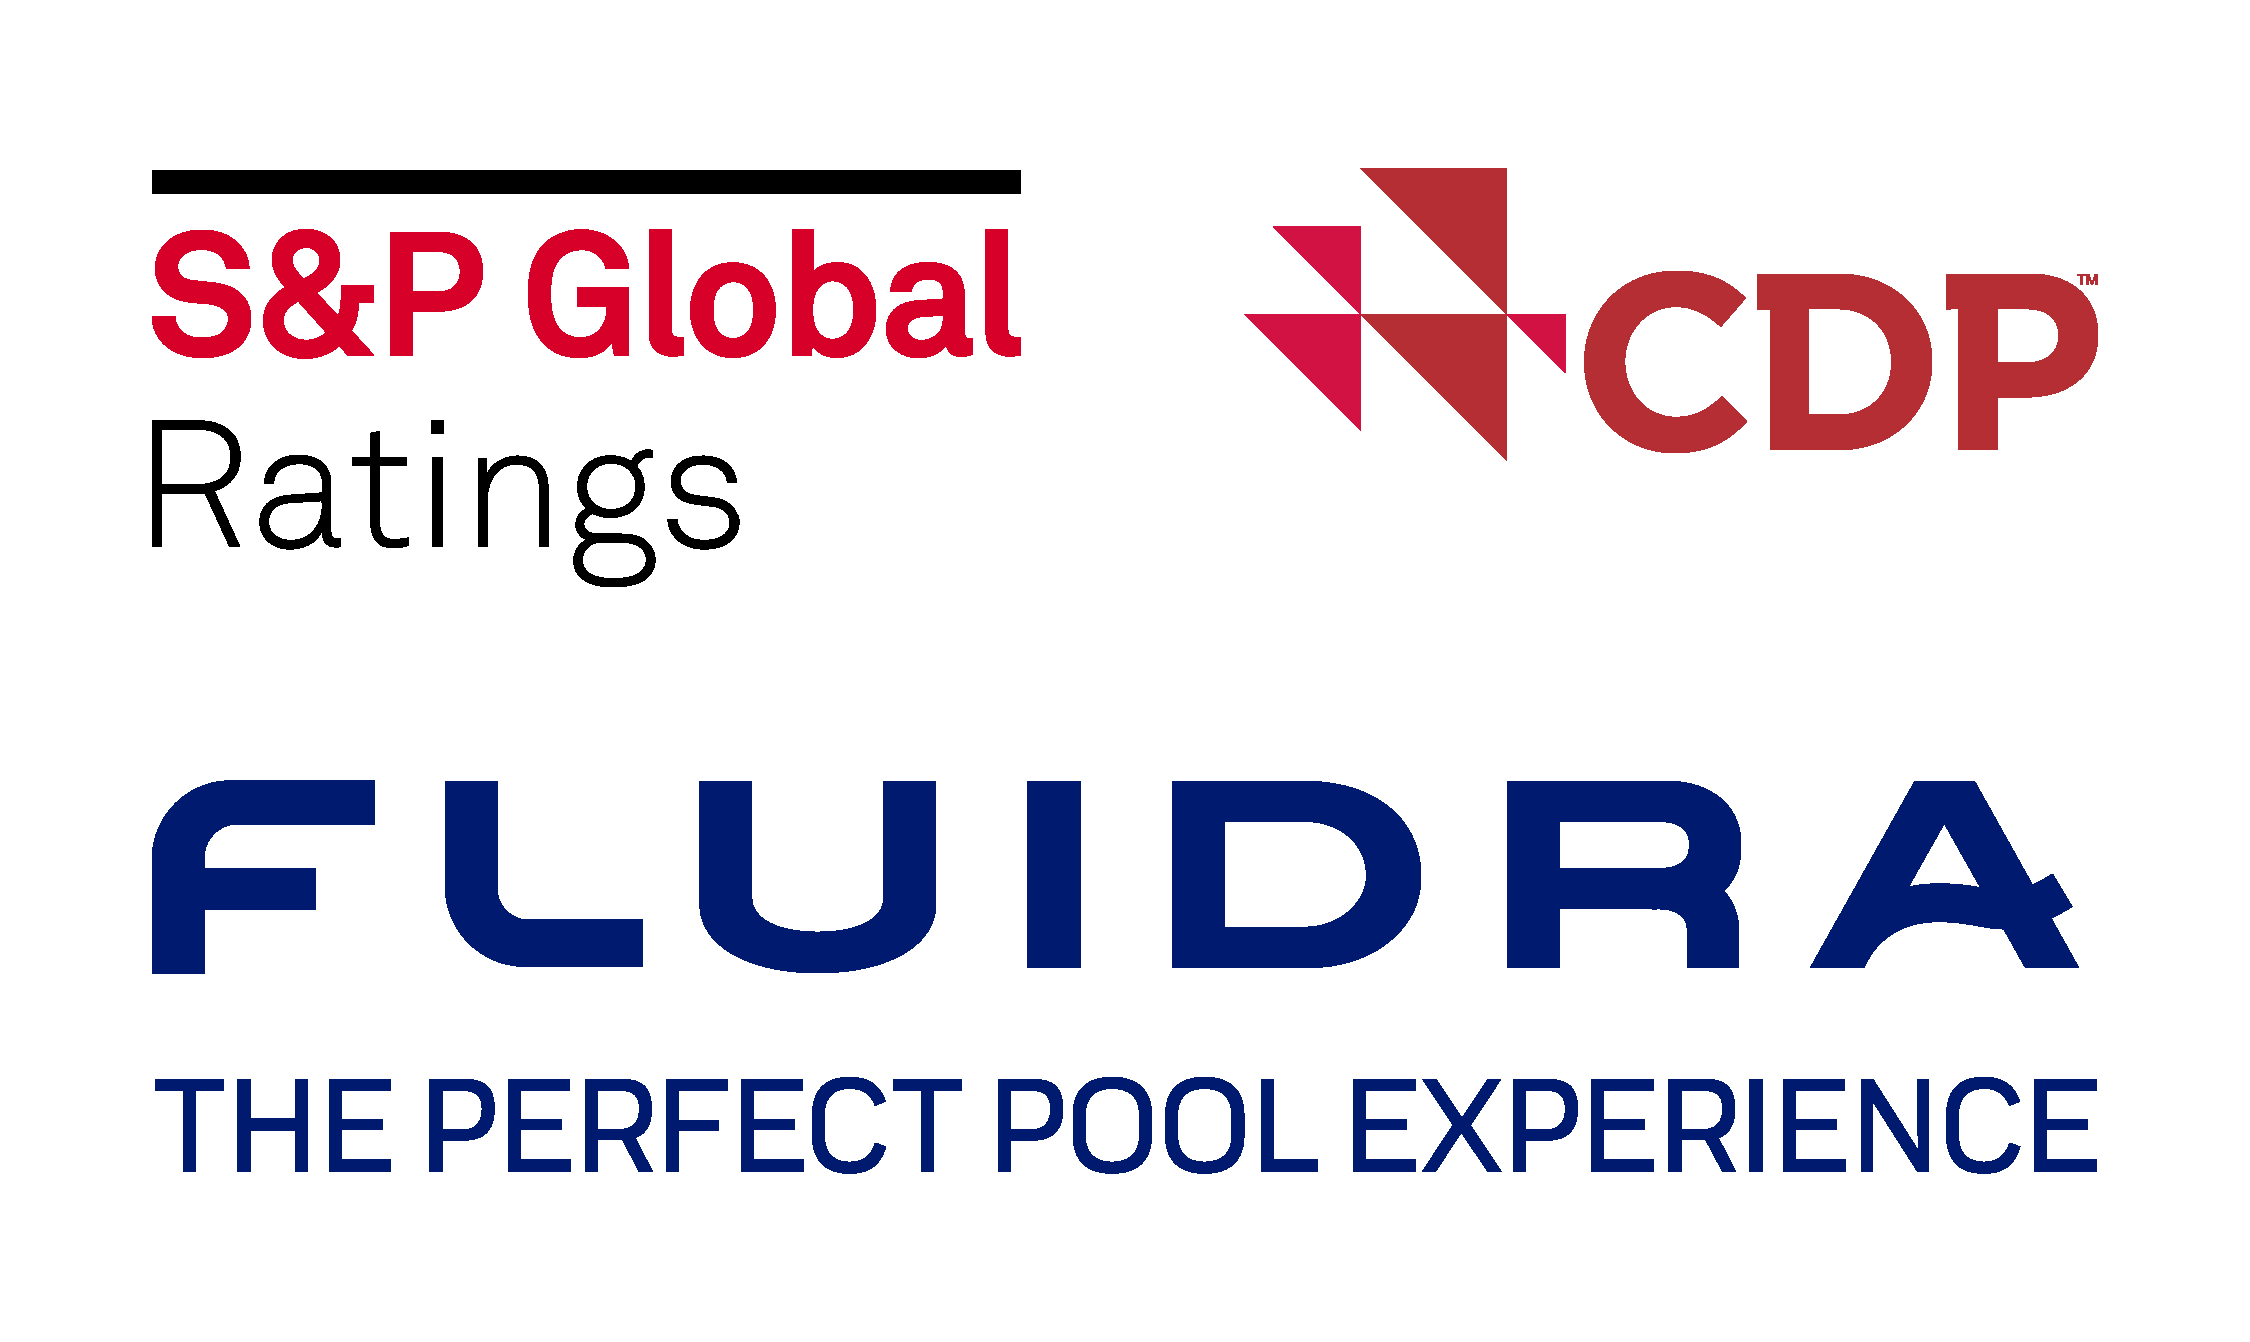 Fluidra ranked among the top sustainable companies by CDP and S&P